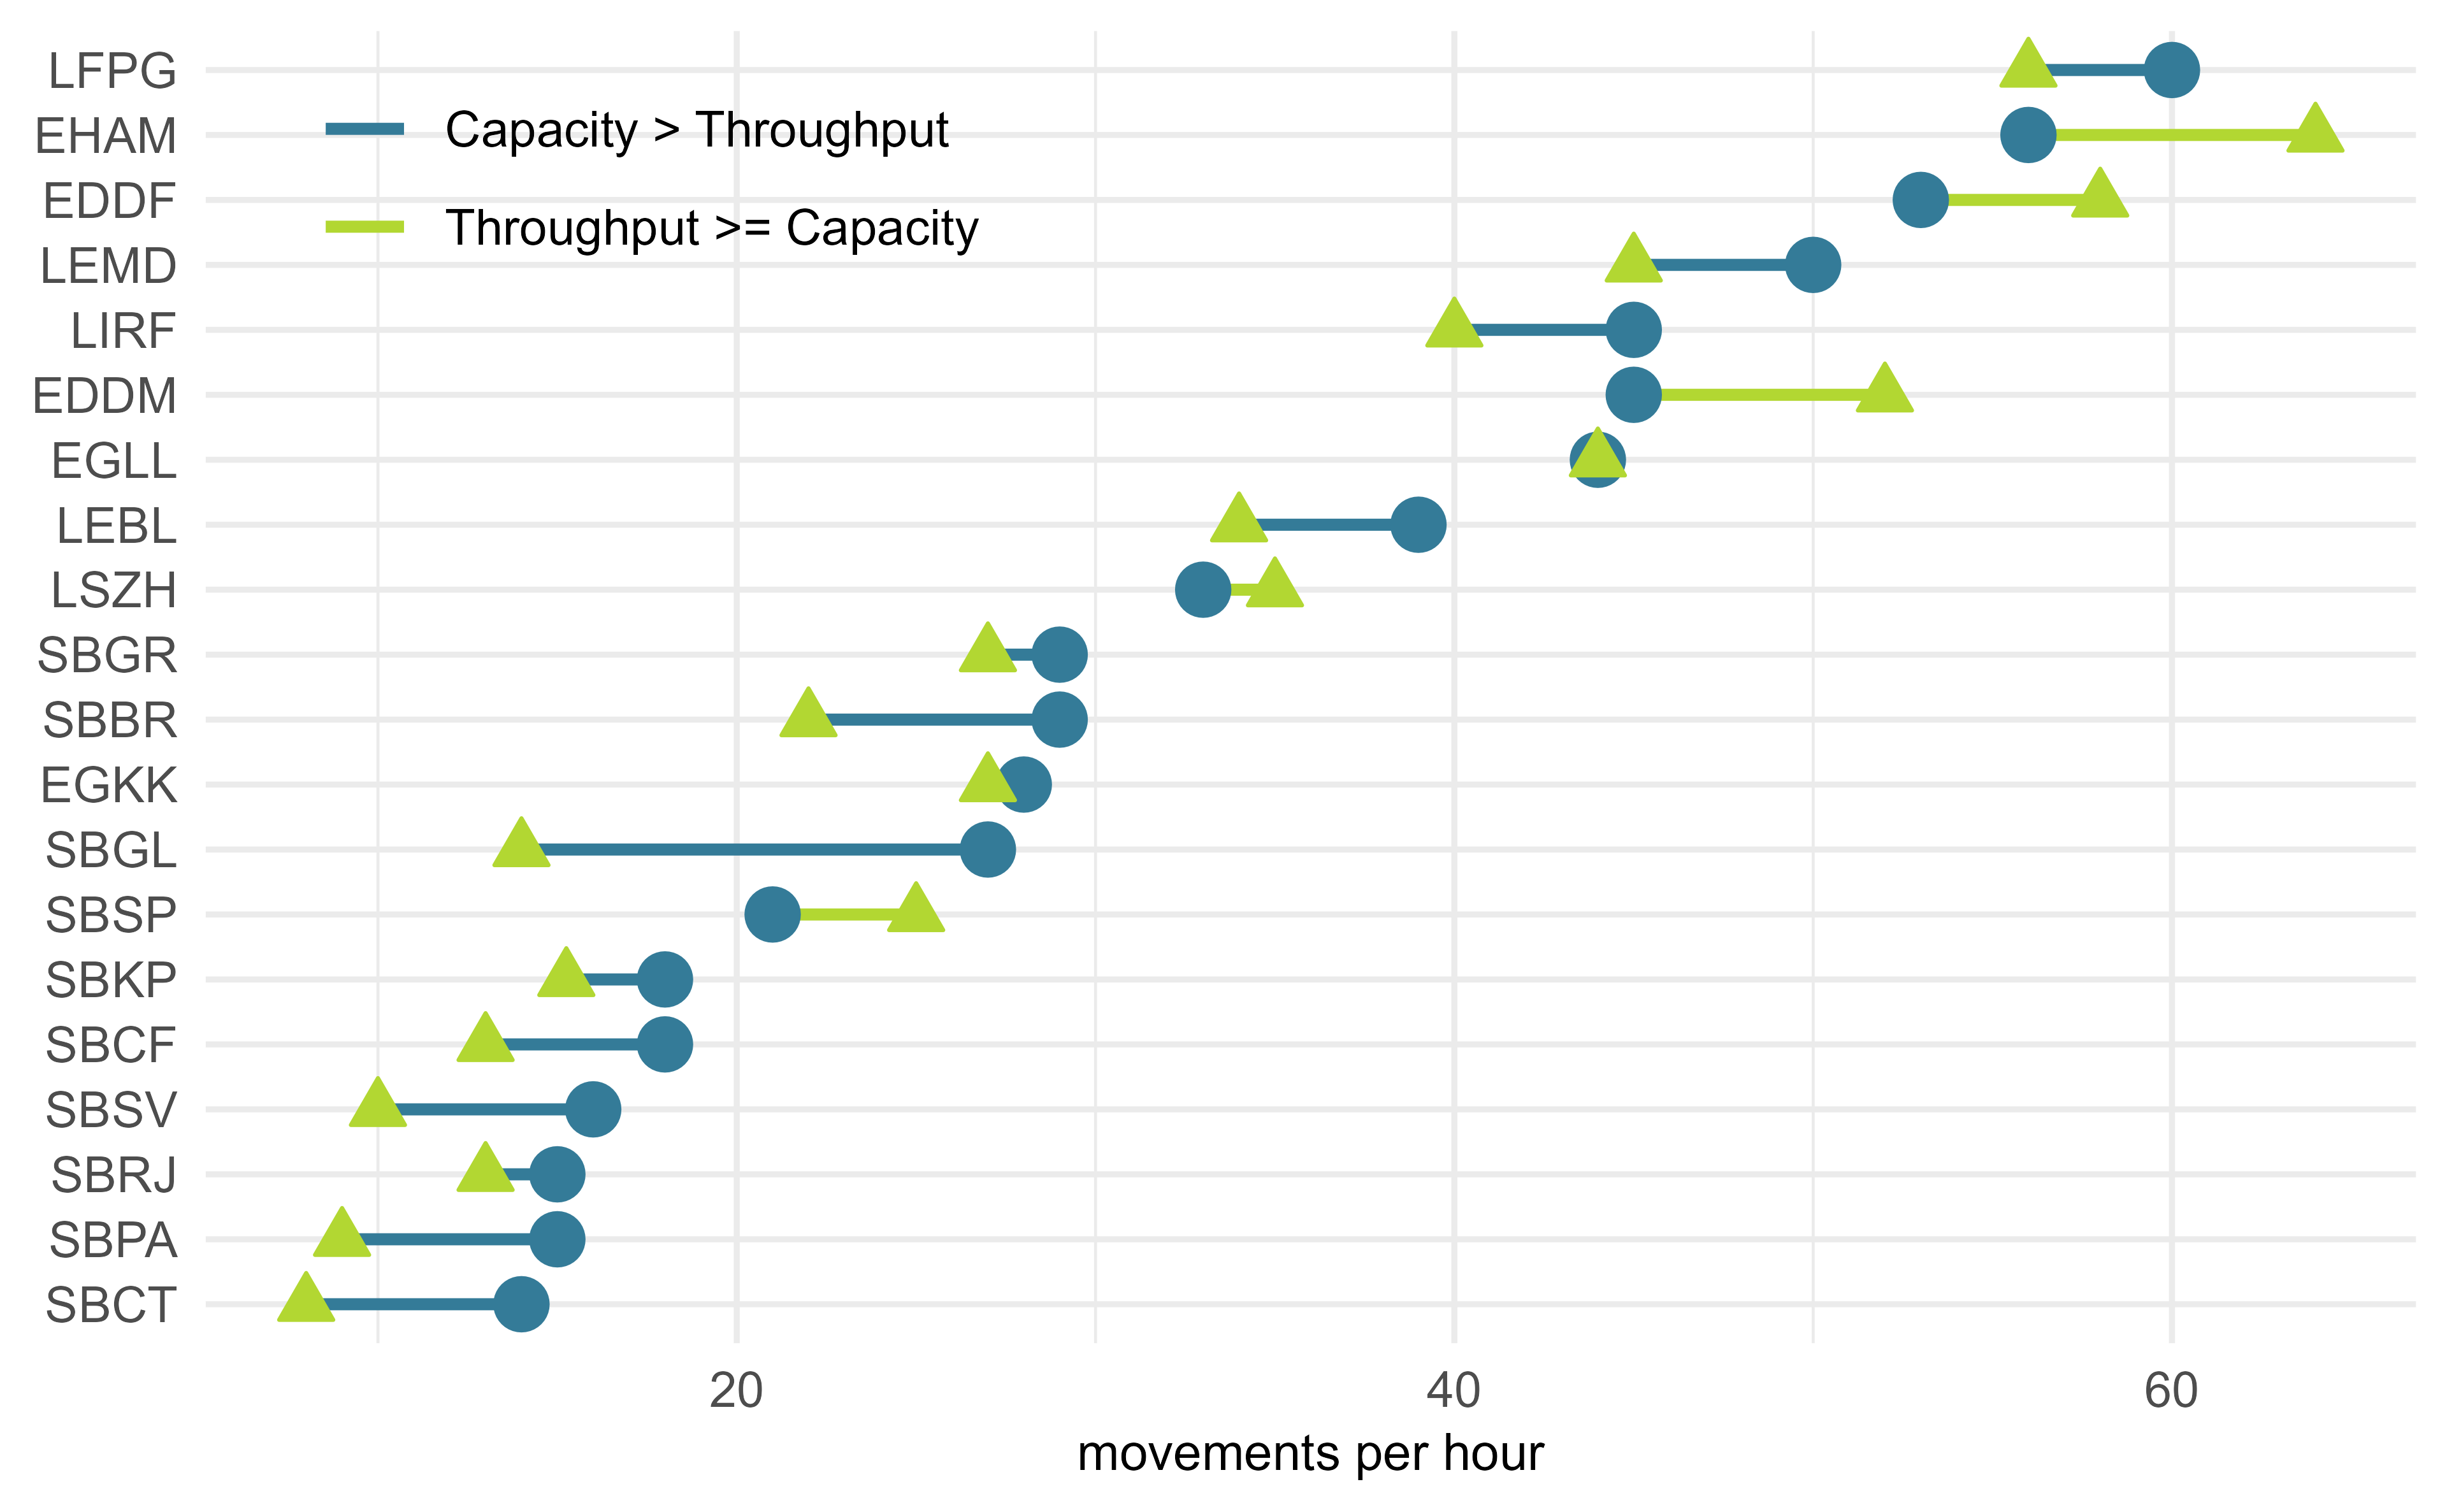 Comparison of declared capacity and throughput for arrival phase.